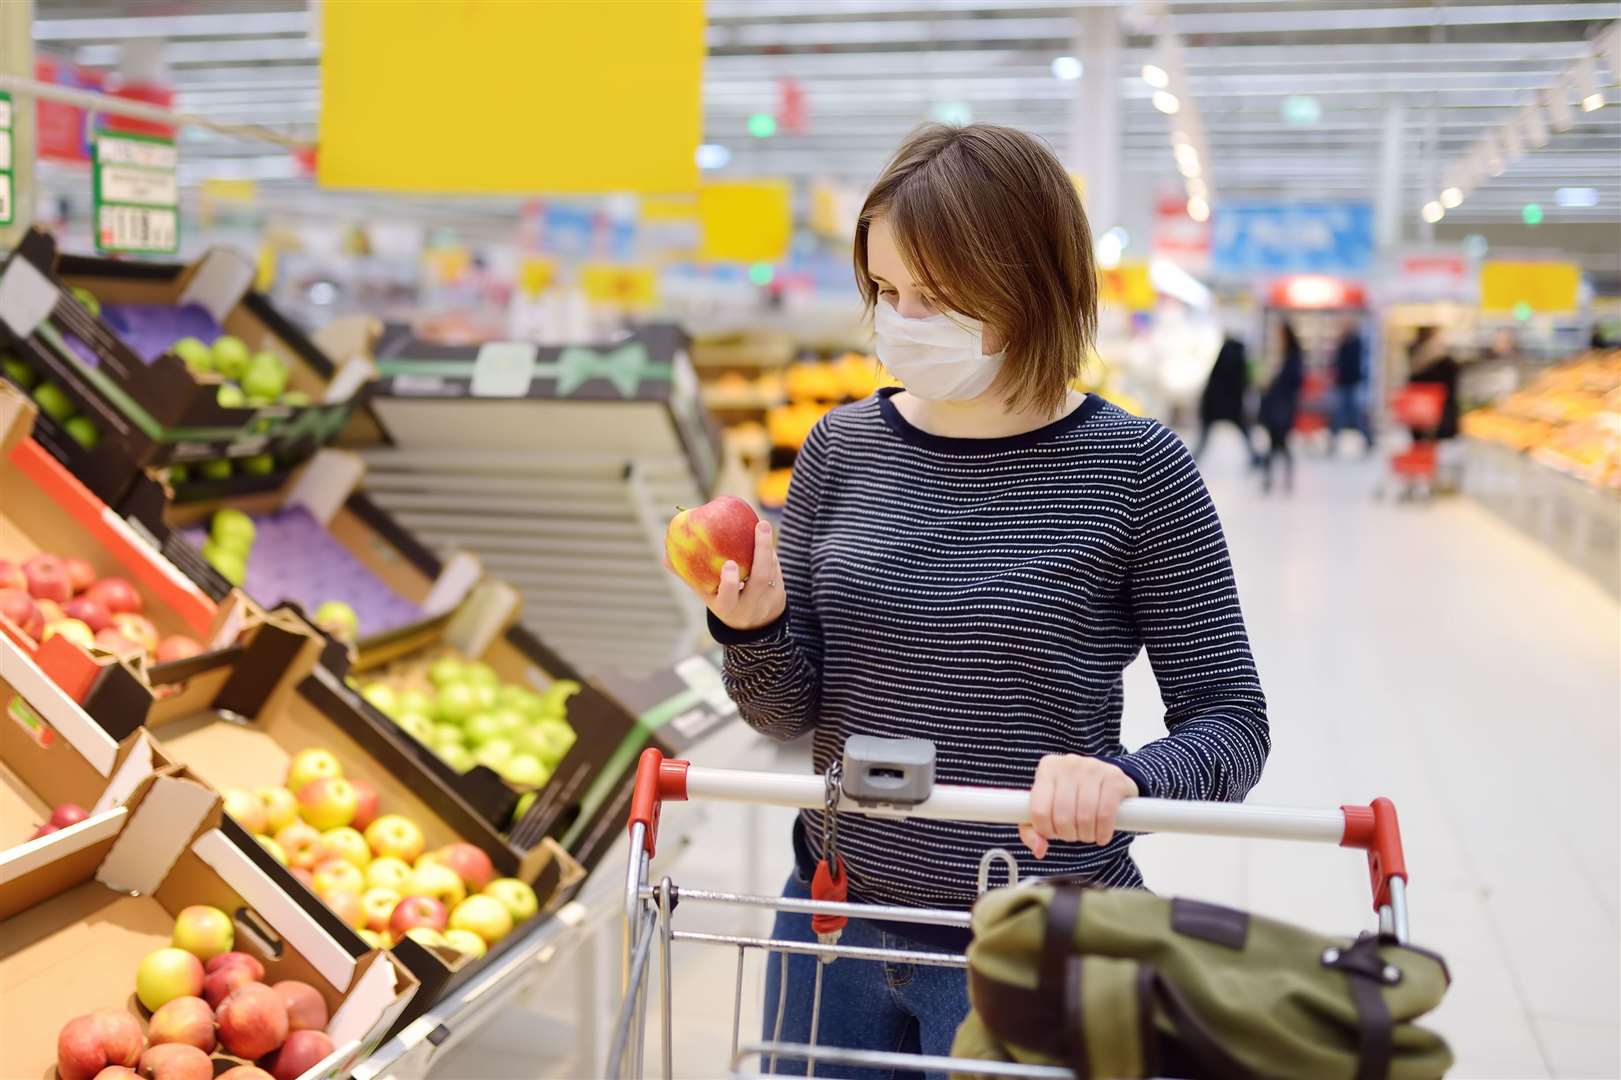 The price of fresh food rose at a record rate in December says the BRC. Image: iStock.